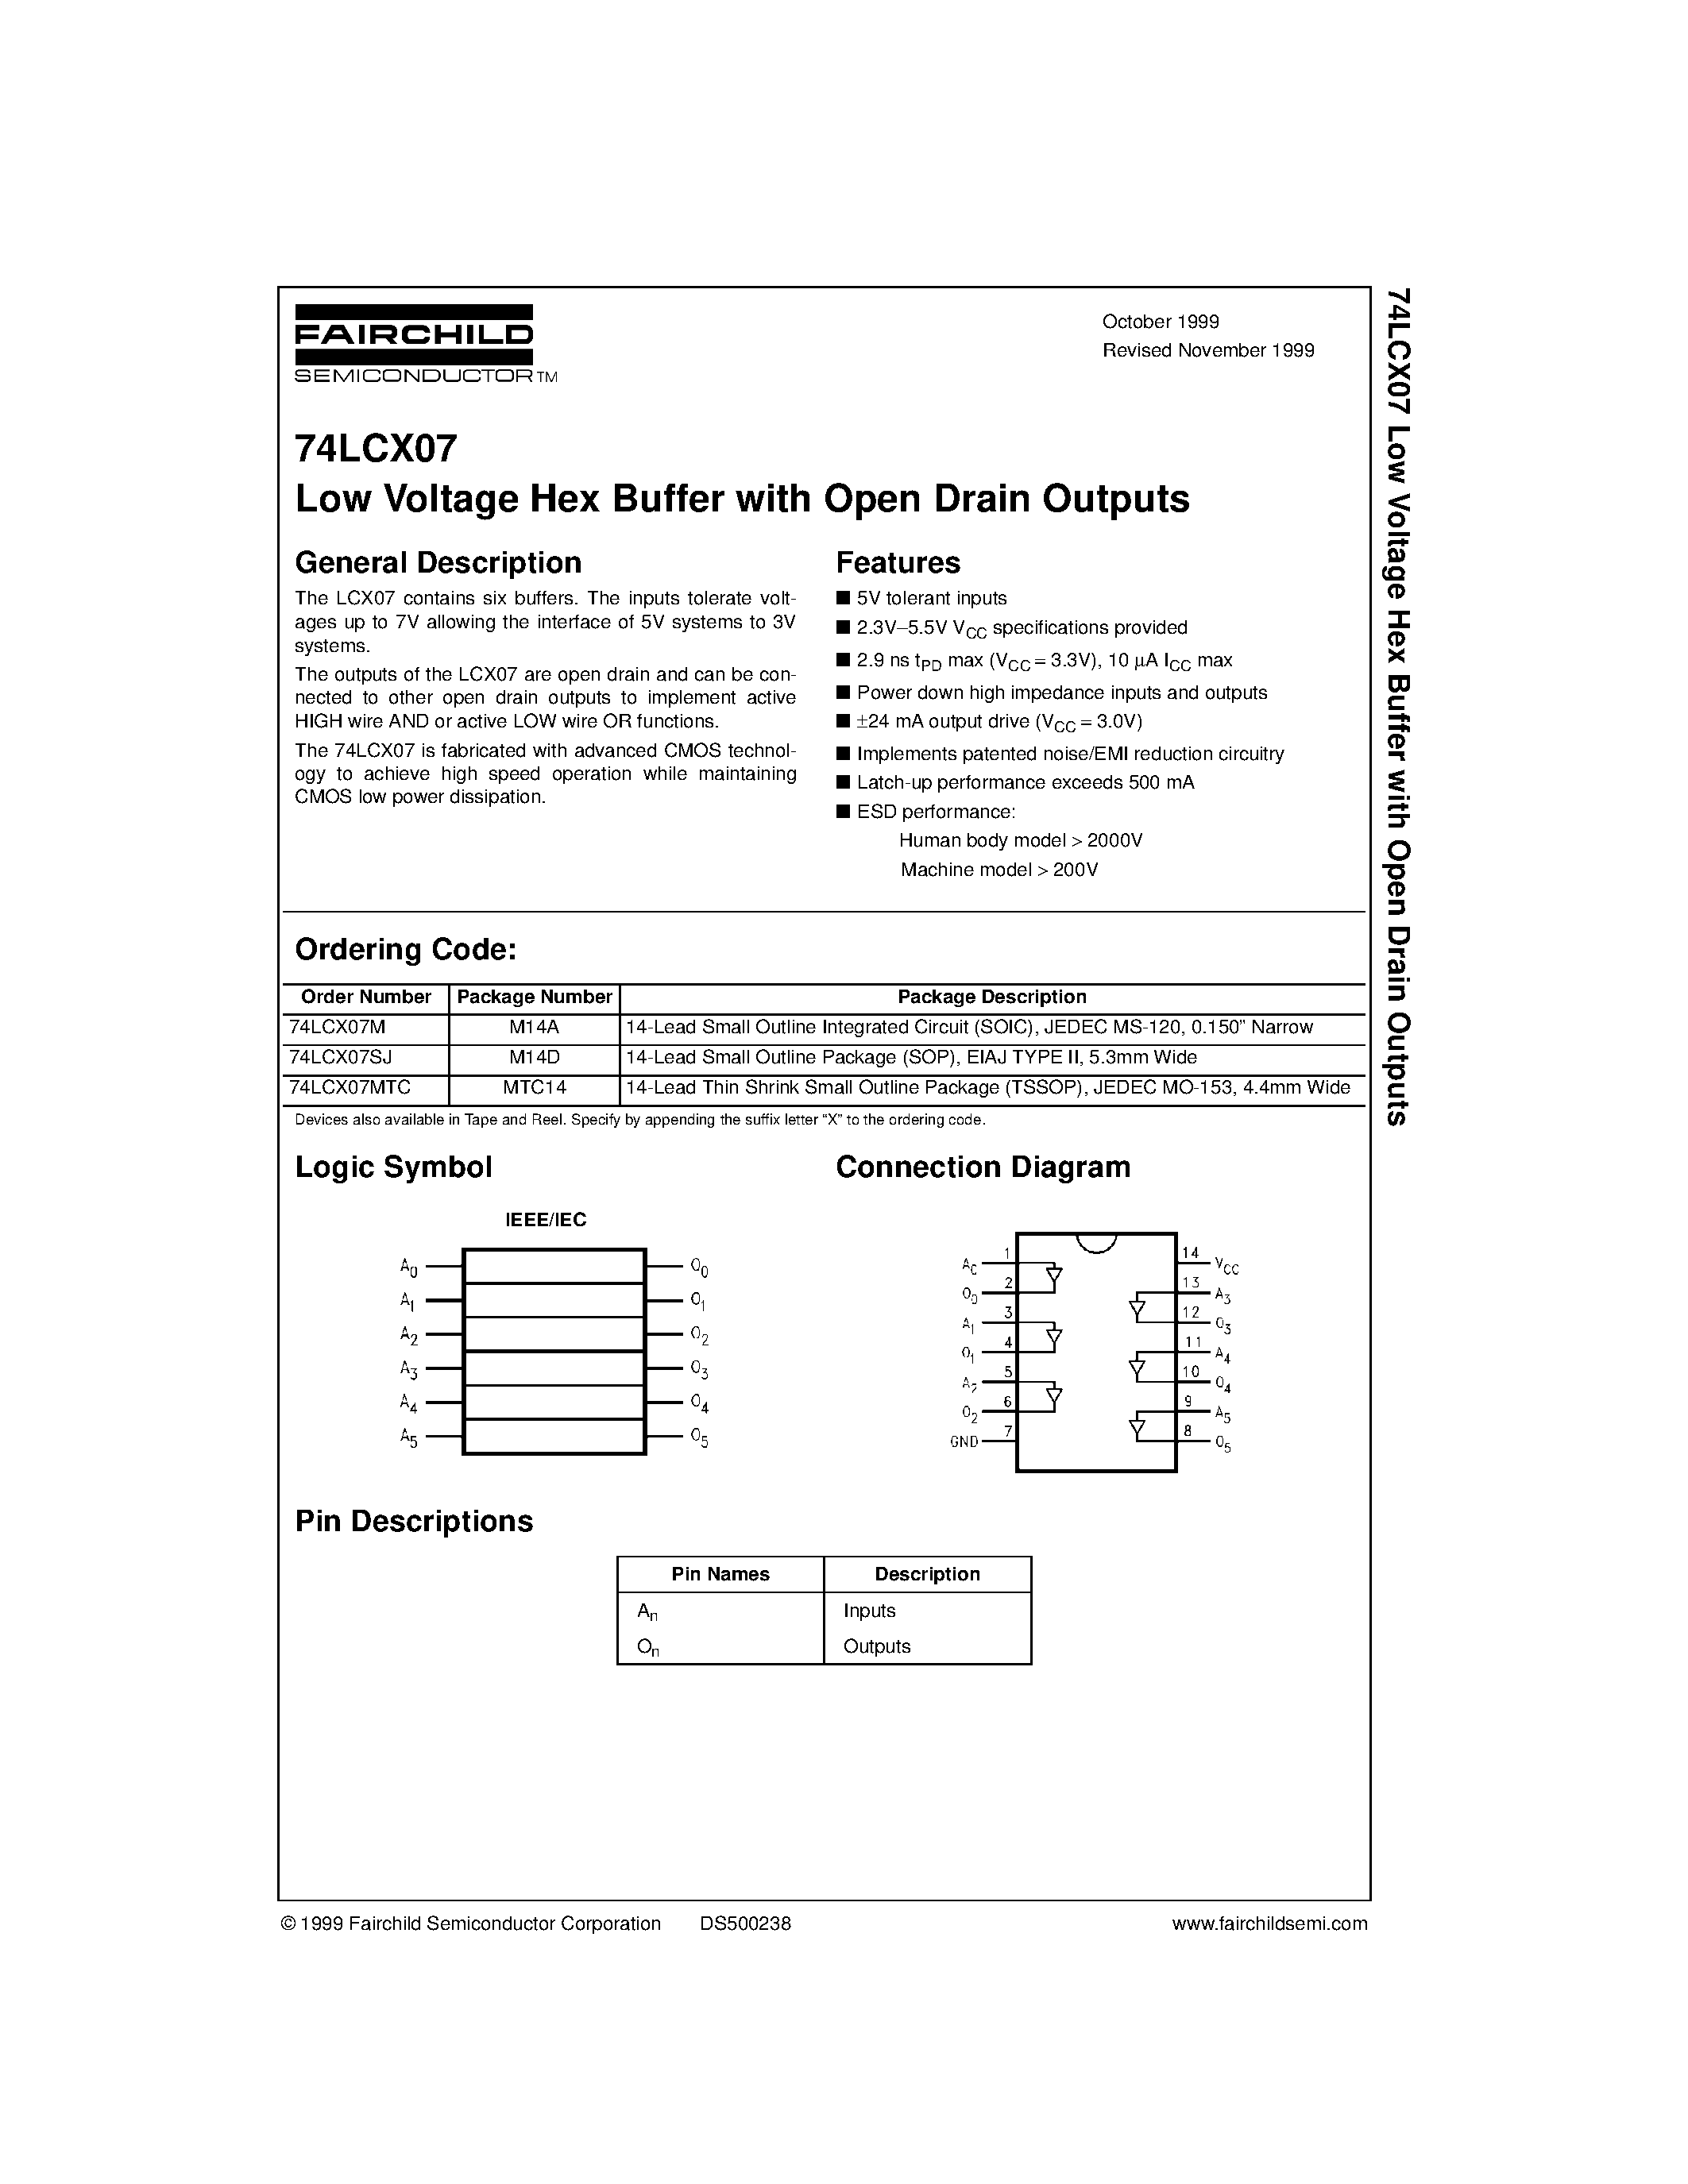 Datasheet 74LCX07SJ - Low Voltage Hex Buffer with Open Drain Outputs page 1